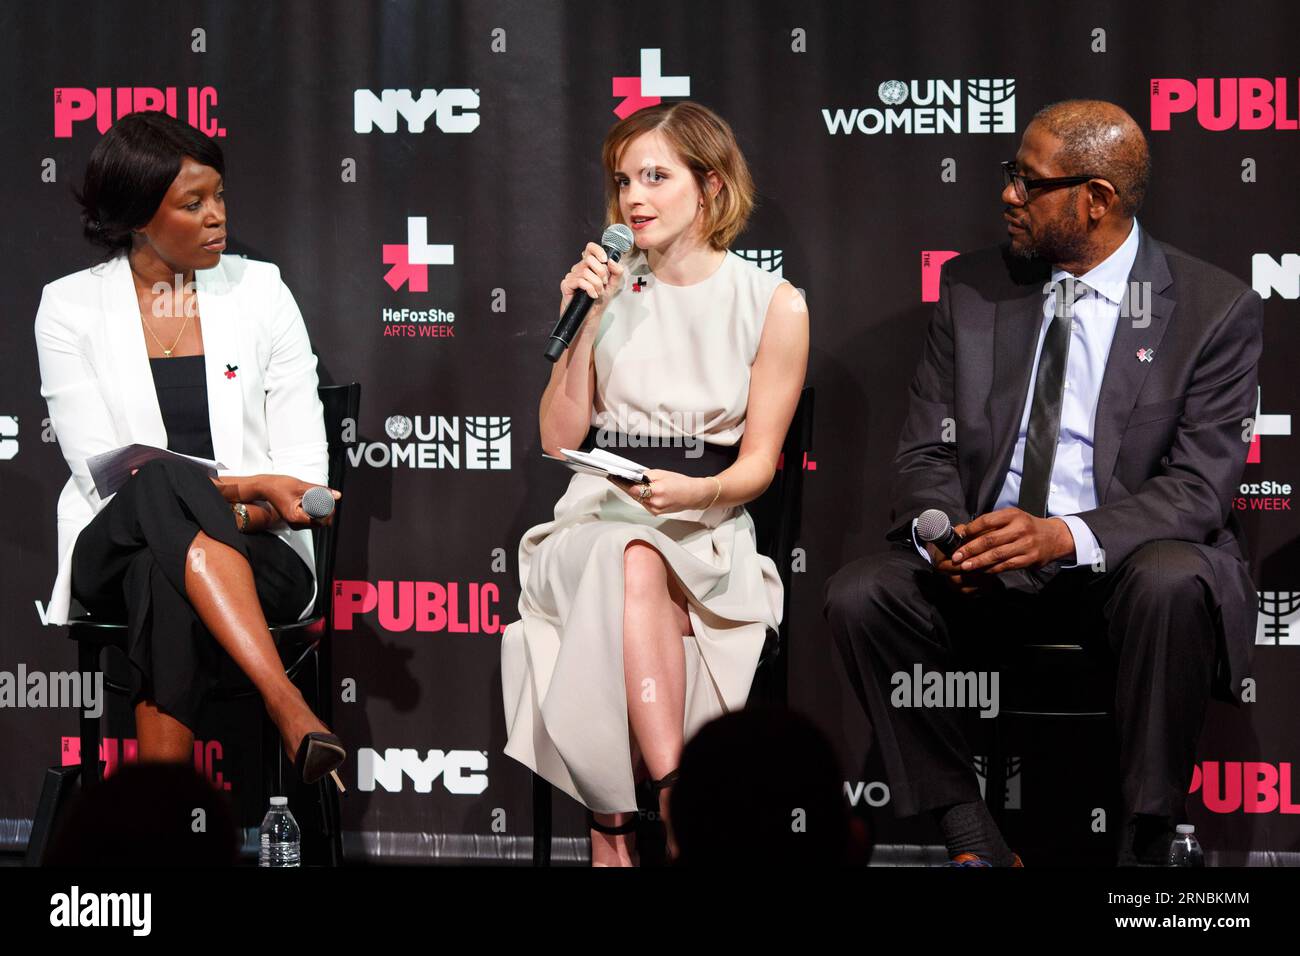 (160308) -- NEW YORK, March 8, 2016 -- British movie star and UN Goodwill Ambassador Emma Watson(C) and American actor, UNESCO Special Envoy for Peace Forest Whitaker(R), attend the UN Women s HeForShe Arts Week Launch Event at the Public Theatre in New York, March 8, 2016. UN Women on Tuesday launched a new initiative -- HeForShe Arts Week -- across New York City to promote gender equality via arts.The event, which is meant to commemorate the International Women s Day that falls on Tuesday, will run from March 8-15. ) UN-NEW YORK-HEFORSHE-LAUNCH LixMuzi PUBLICATIONxNOTxINxCHN   New York March Stock Photo